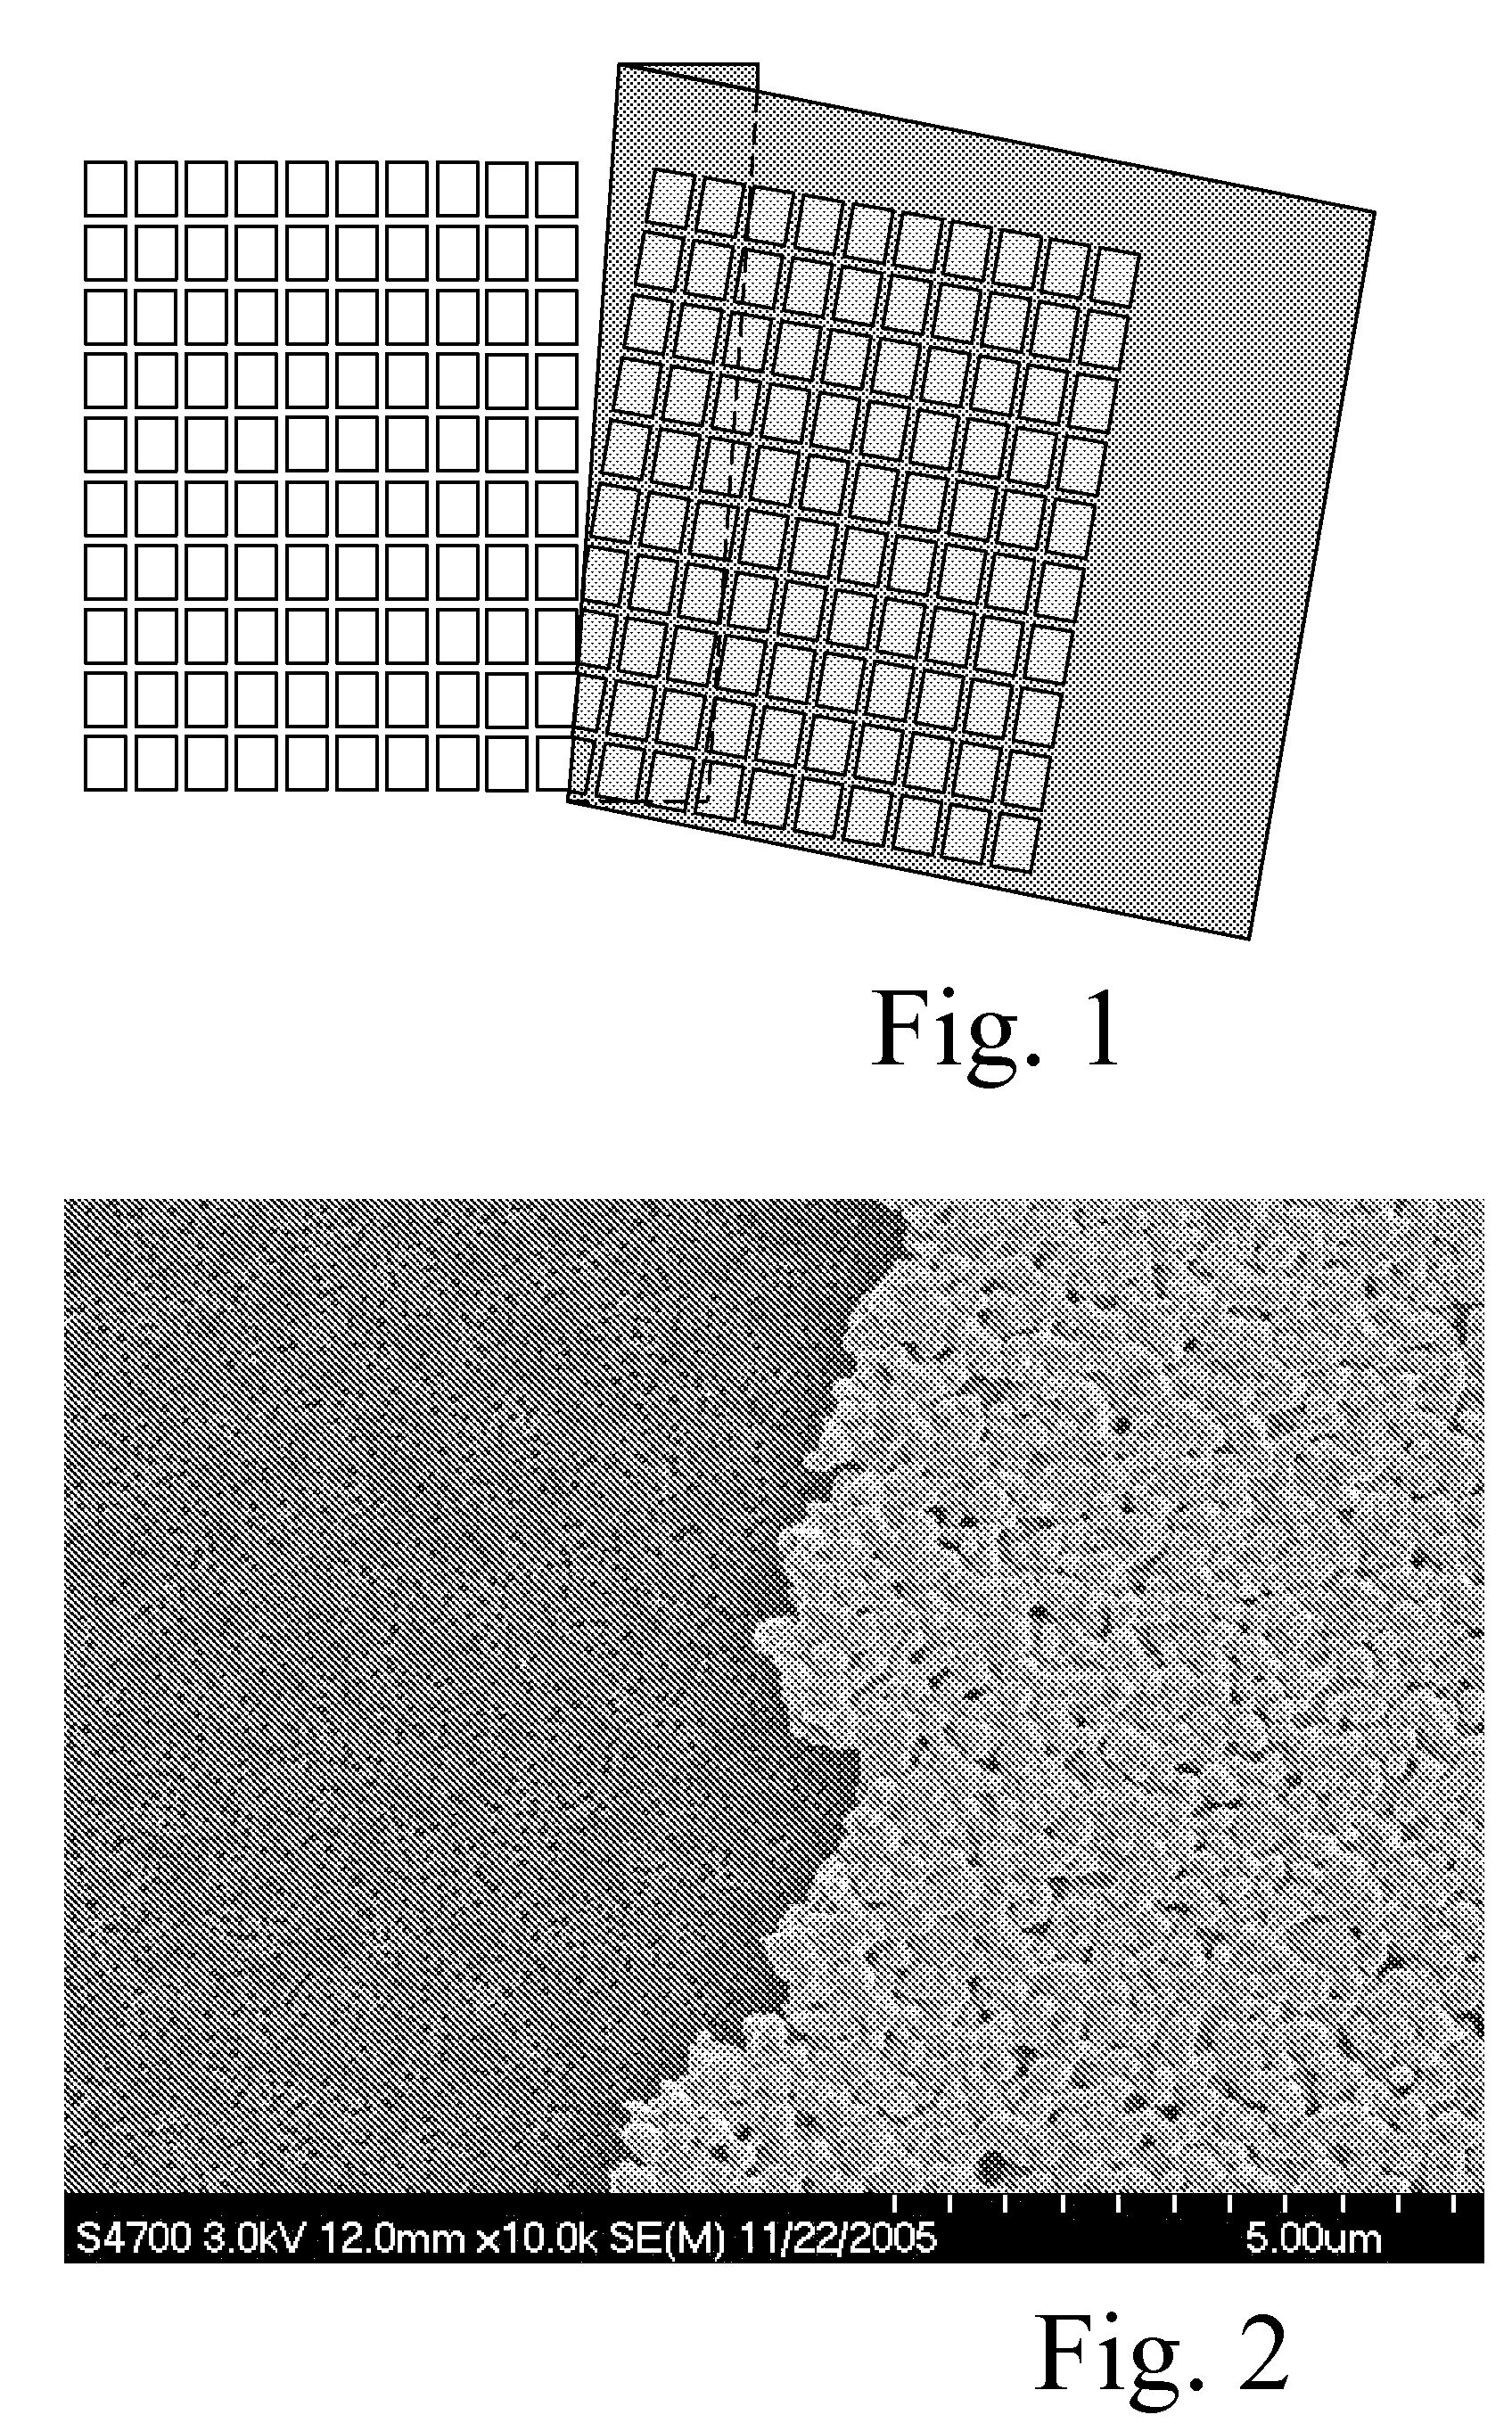 Silver ink compositions containing a cationic styrene/acrylate copolymer additive for inkjet printing